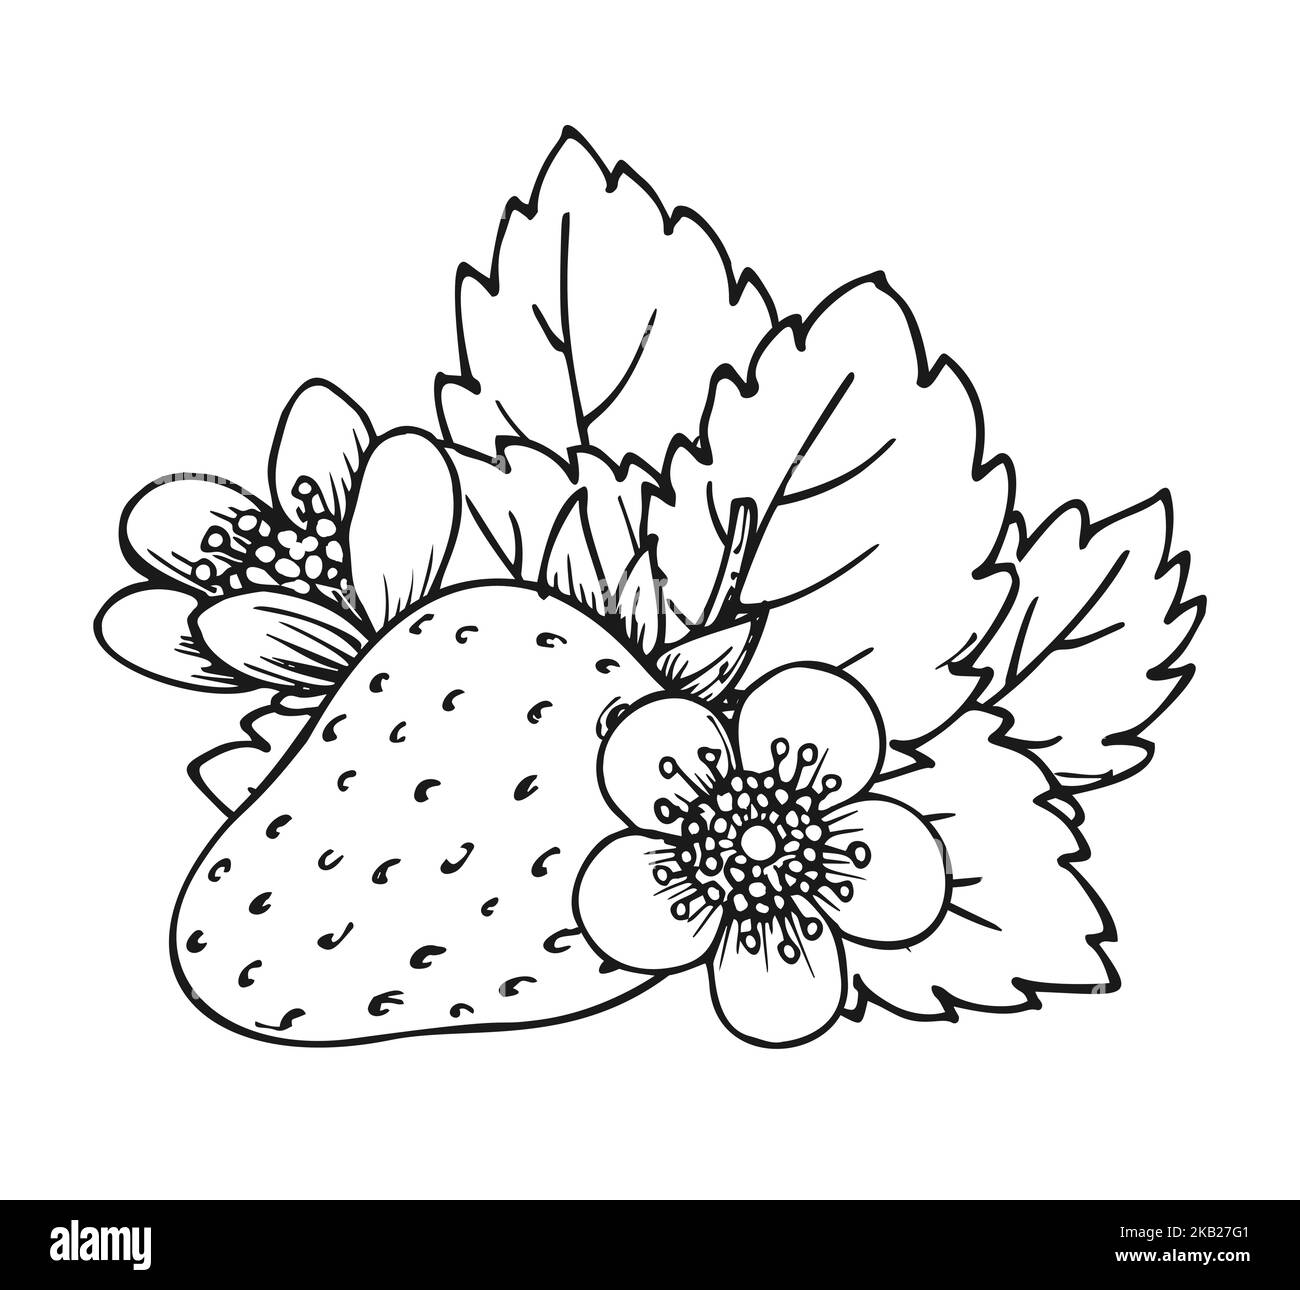 Whole ripe strawberry coloring book page. Flowering bush with single berry flowers and leaves. Wild forest berries. Tasty sweet fruit. Realistic juicy strawberries black white hand drawn sketch Stock Vector